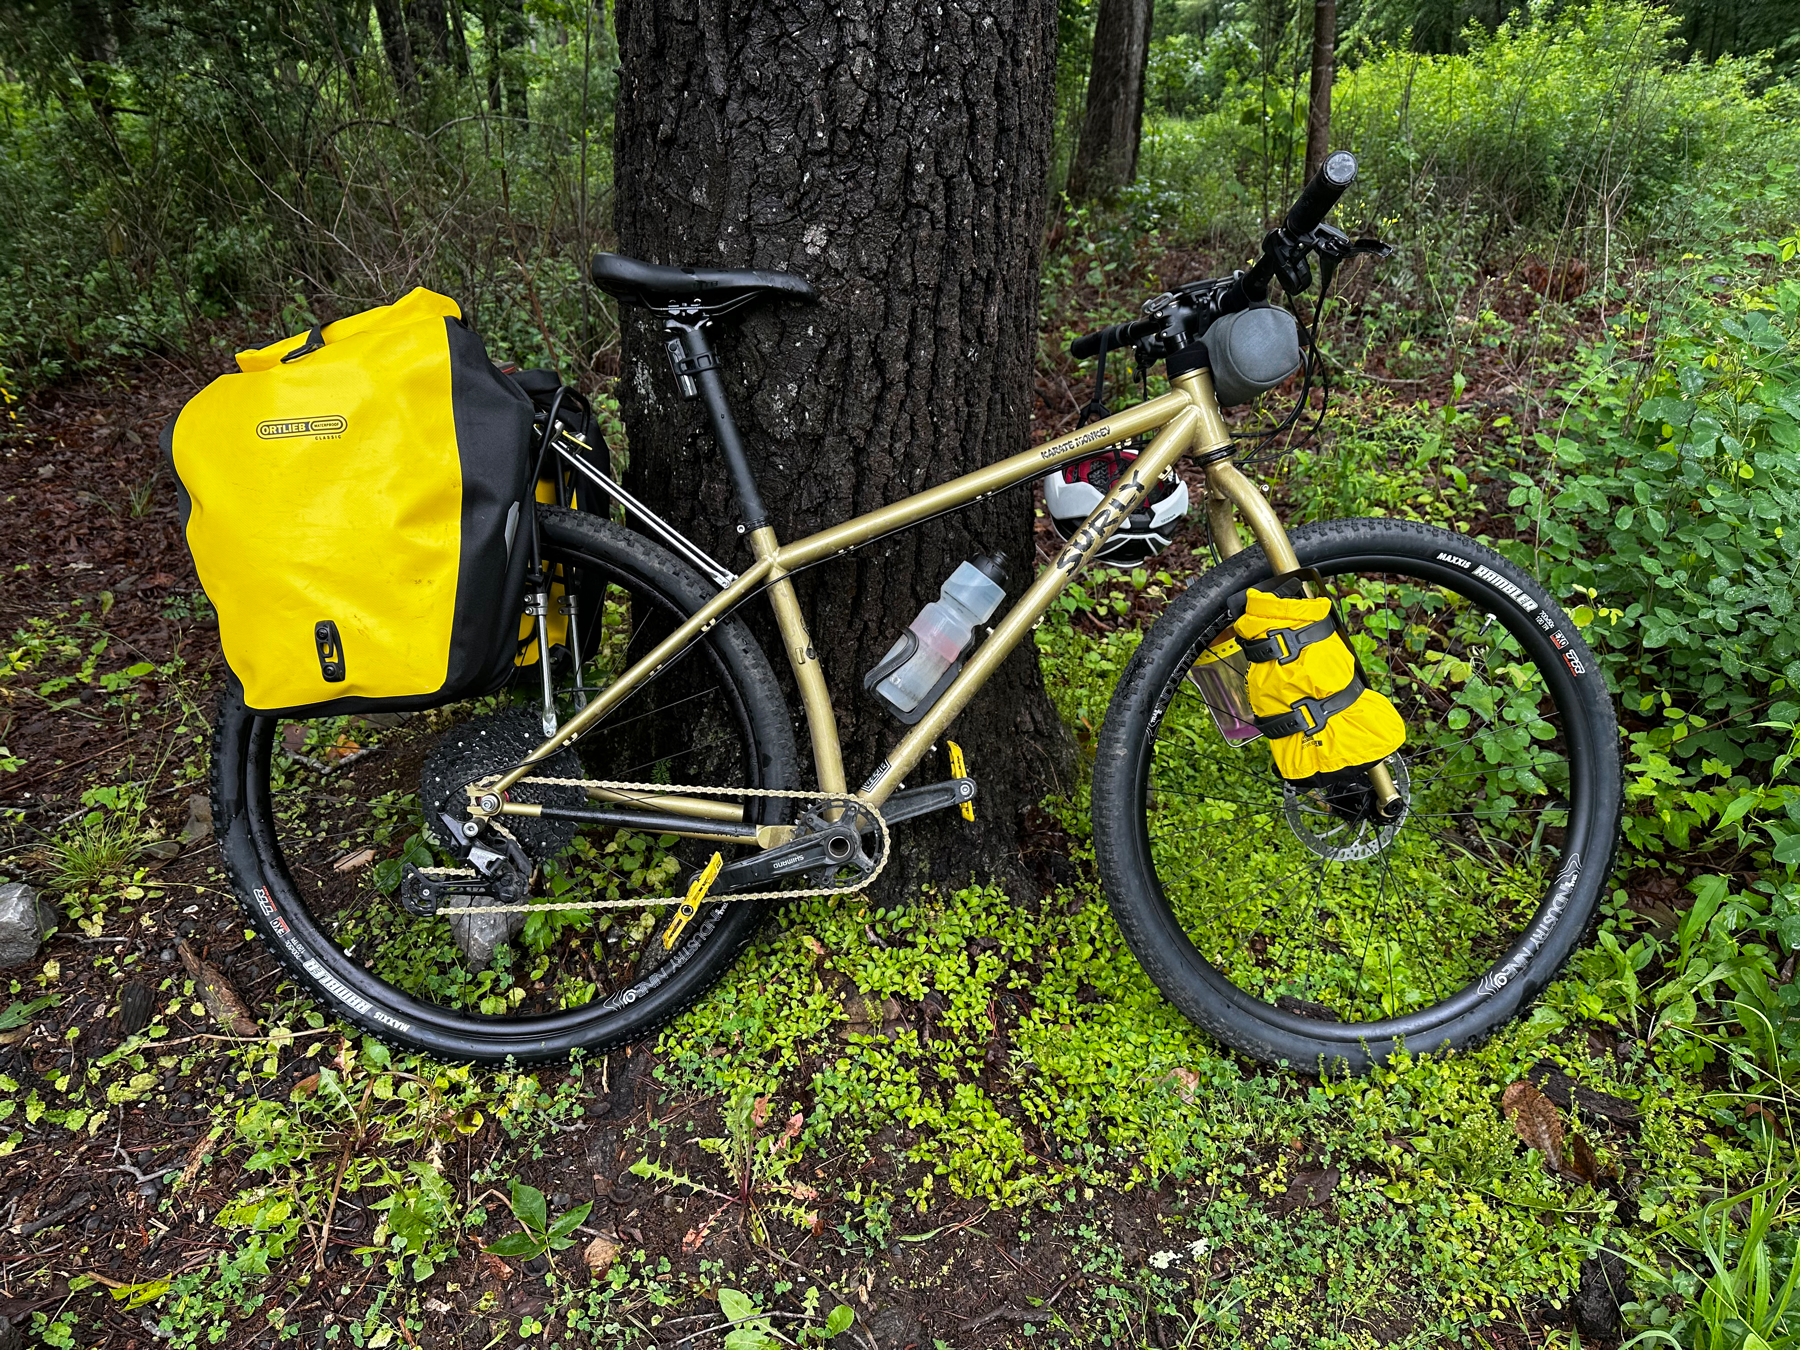 My bike, fully packed and ready to go, leaning up against a tree.